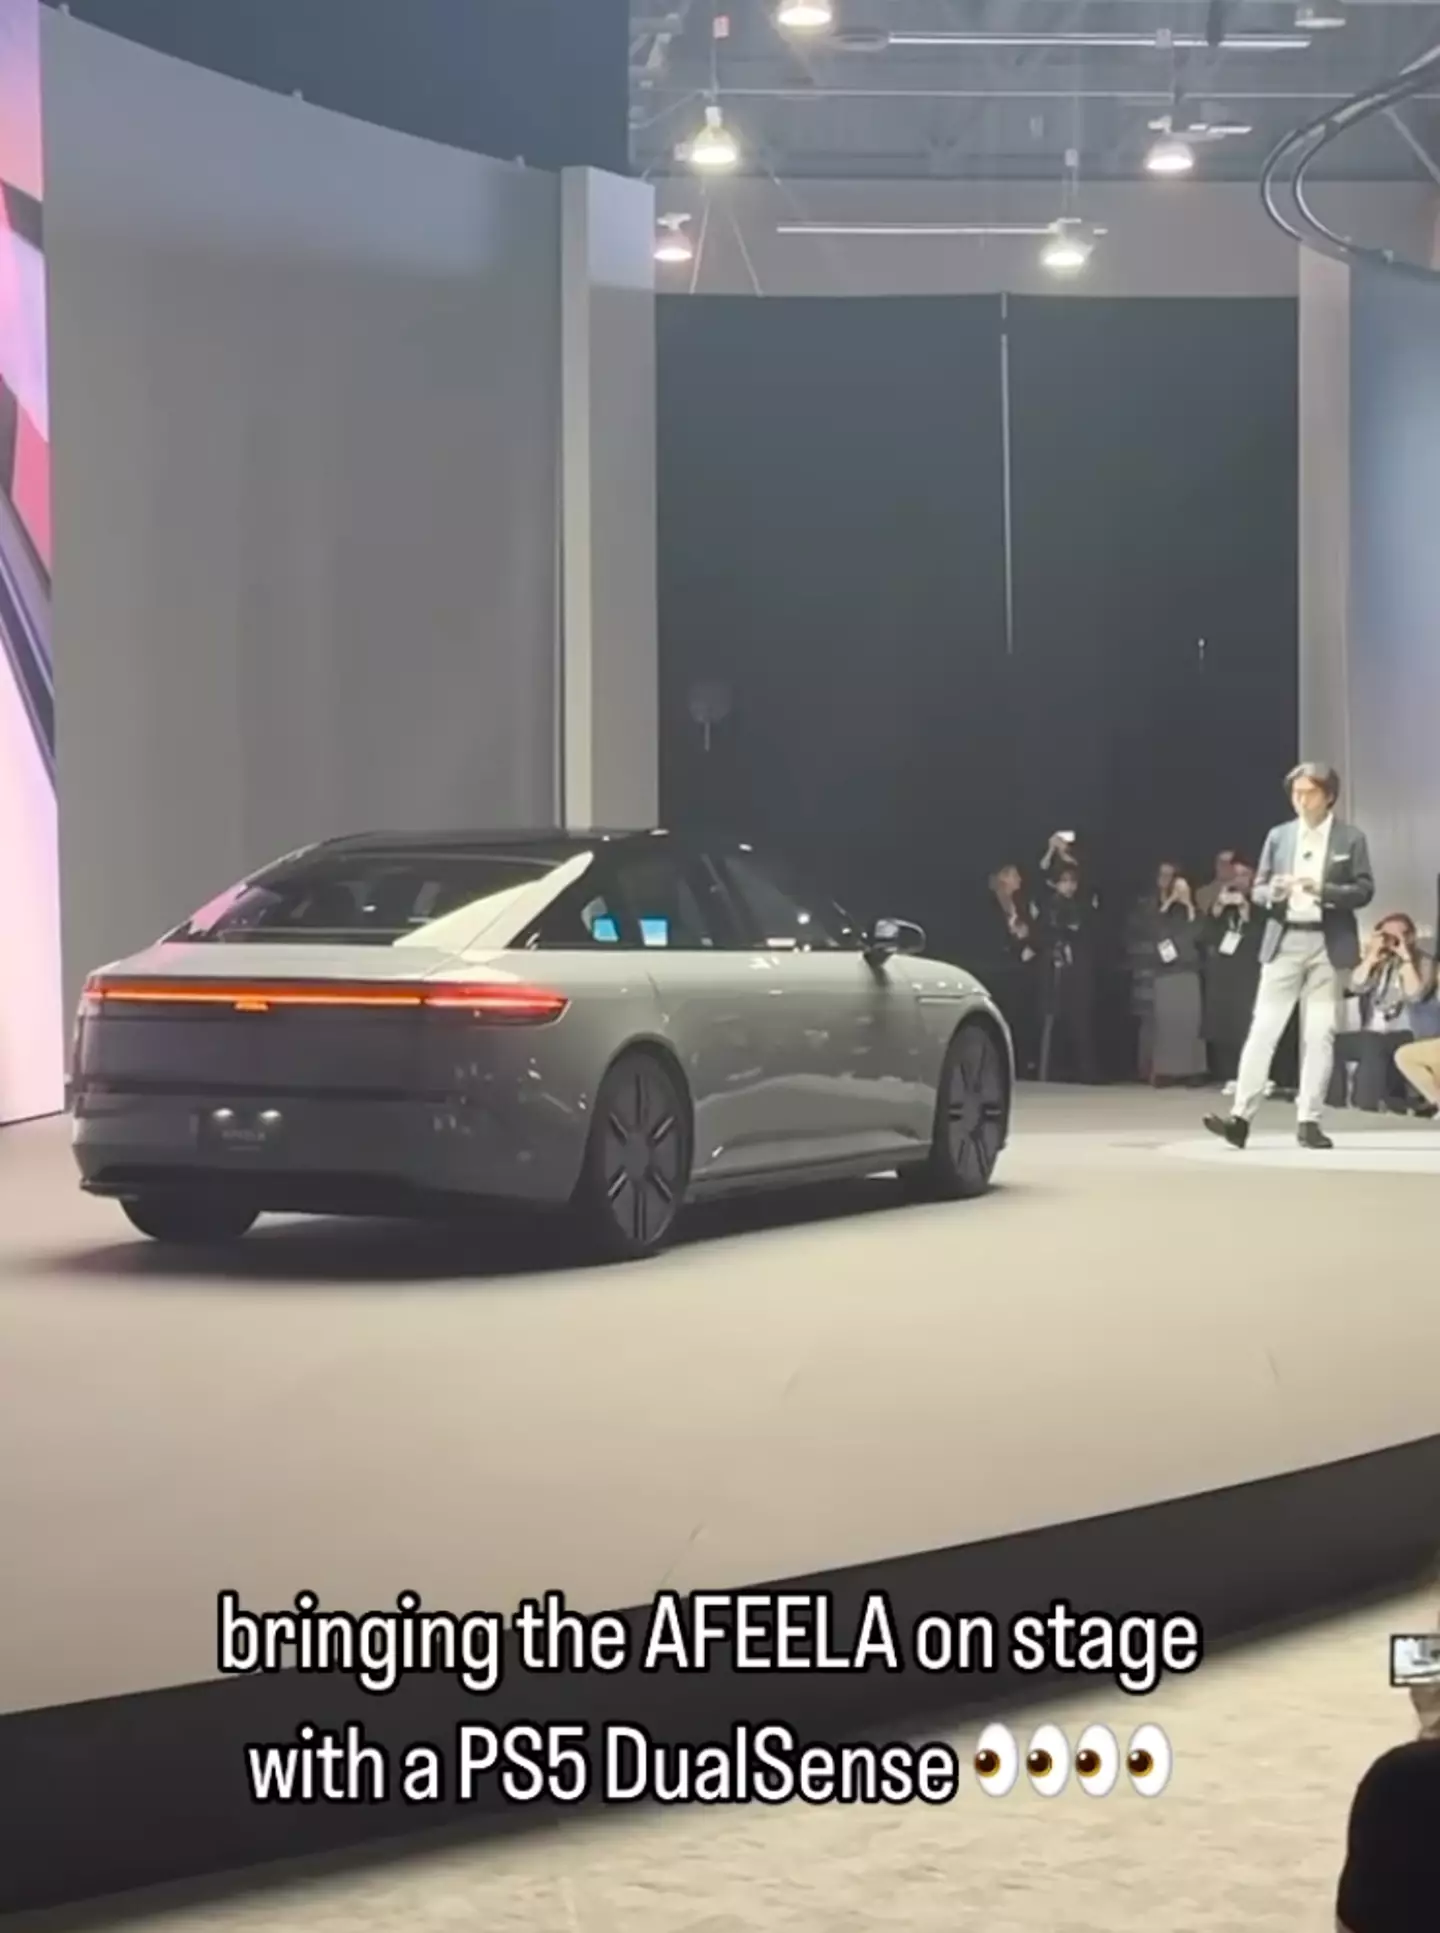 COO Izumi Kawanishi drove the car on stage using a PS5 controller.